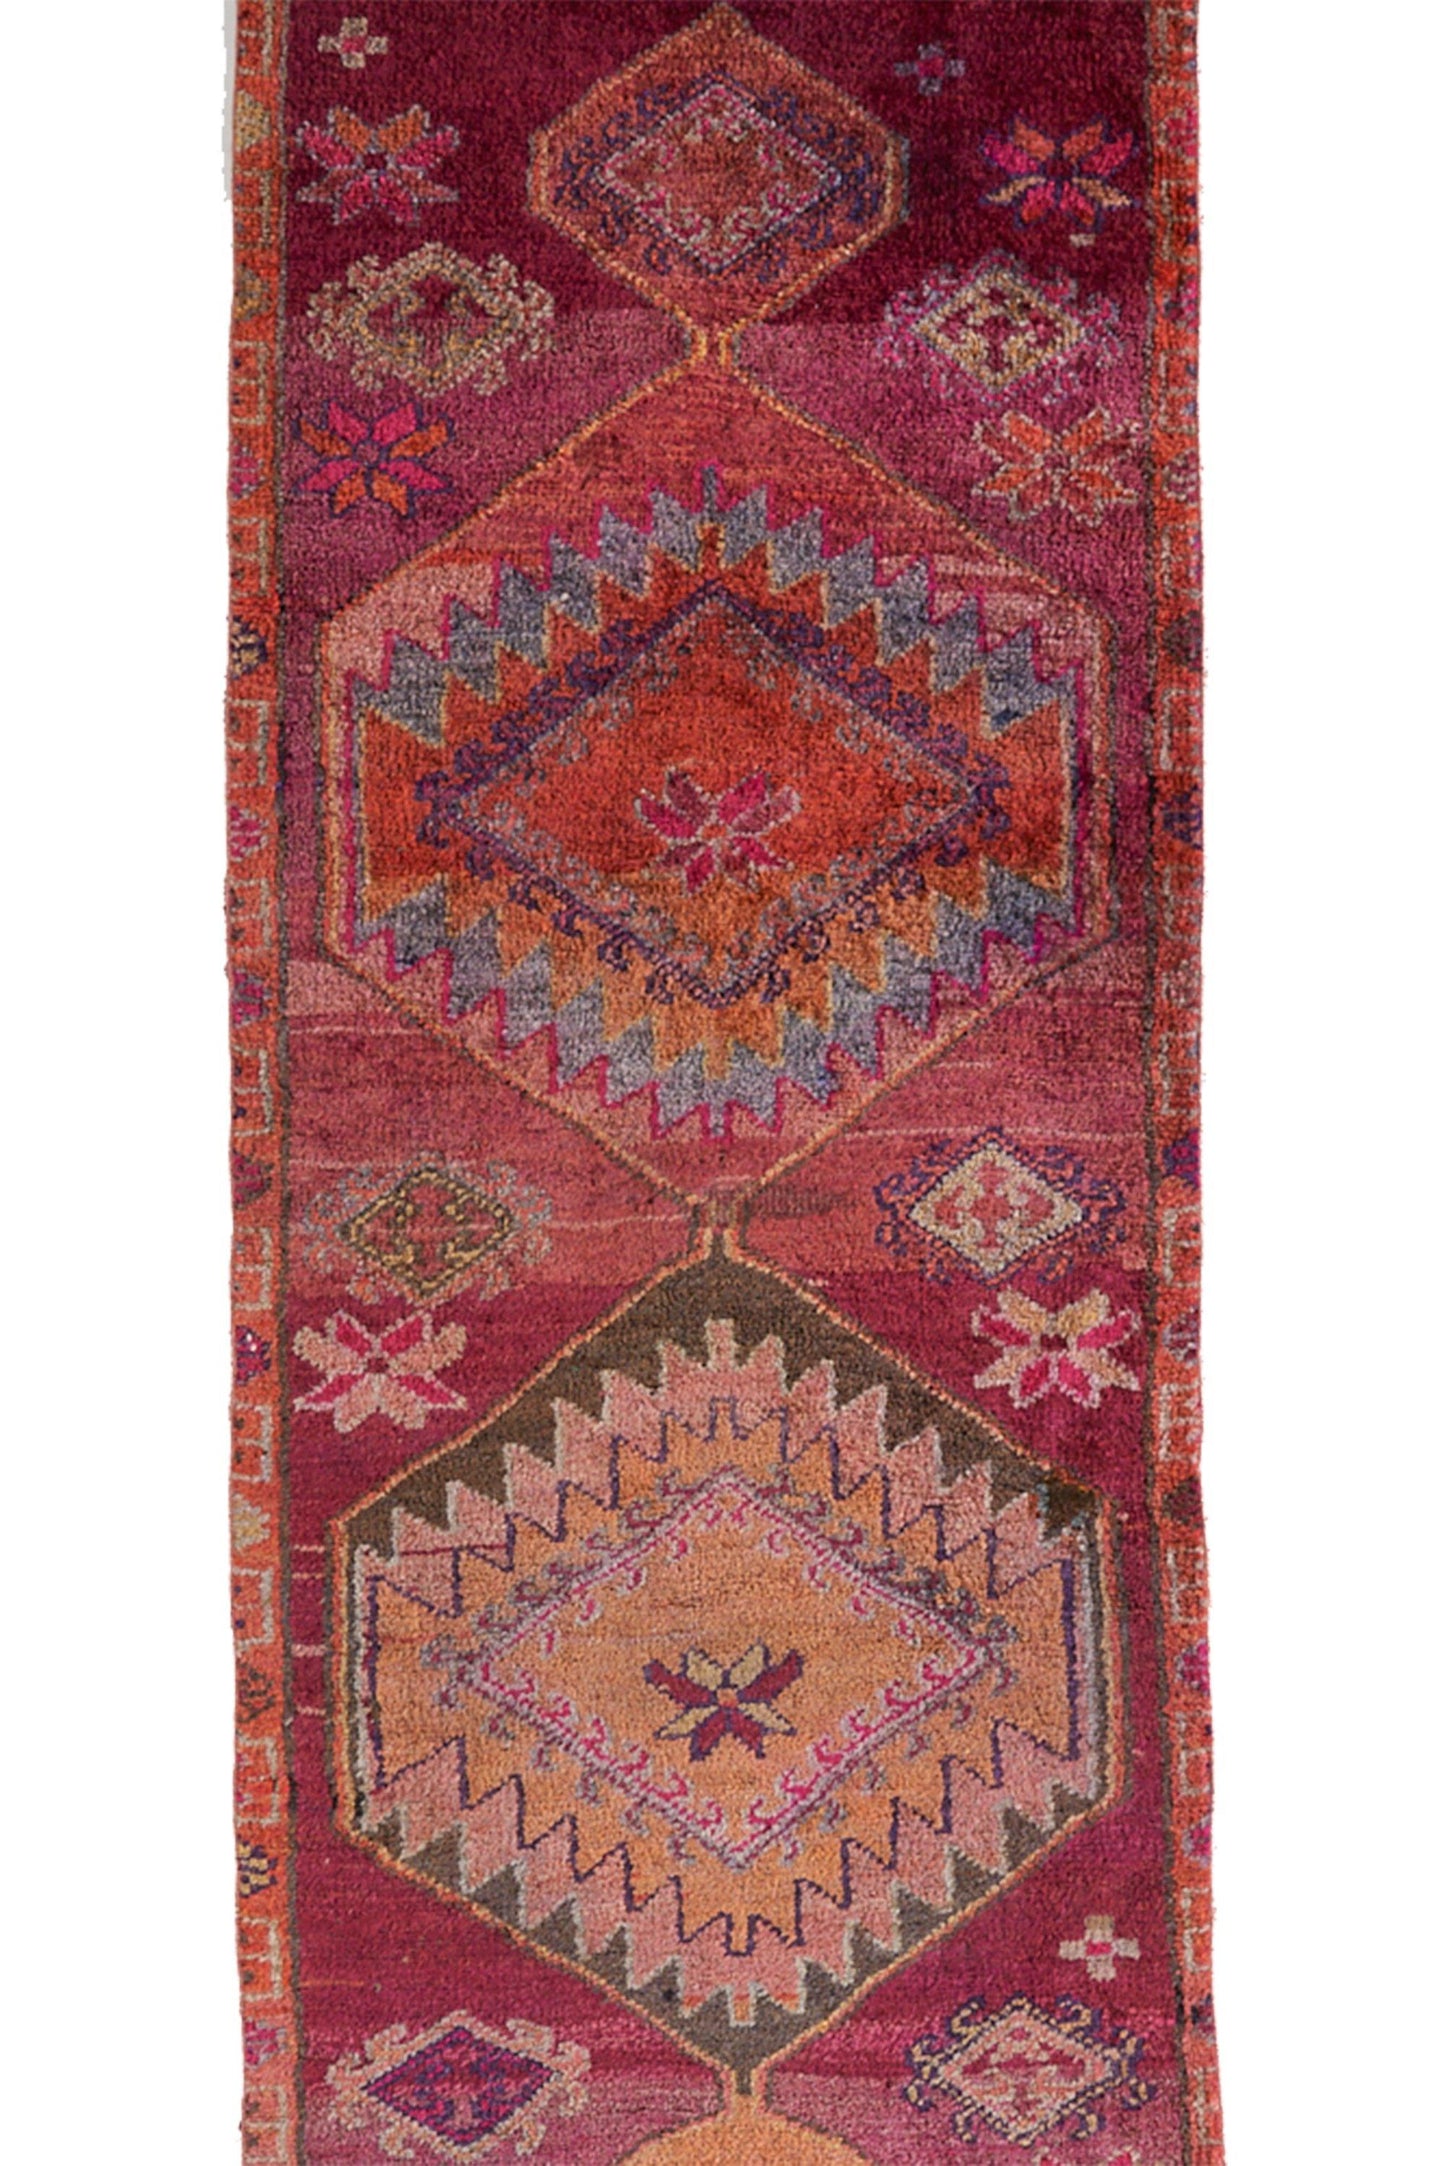 'Delight' Turkish Vintage Runner Rug (On Hold) - 2'11'' x 12'3'' - Canary Lane - Curated Textiles